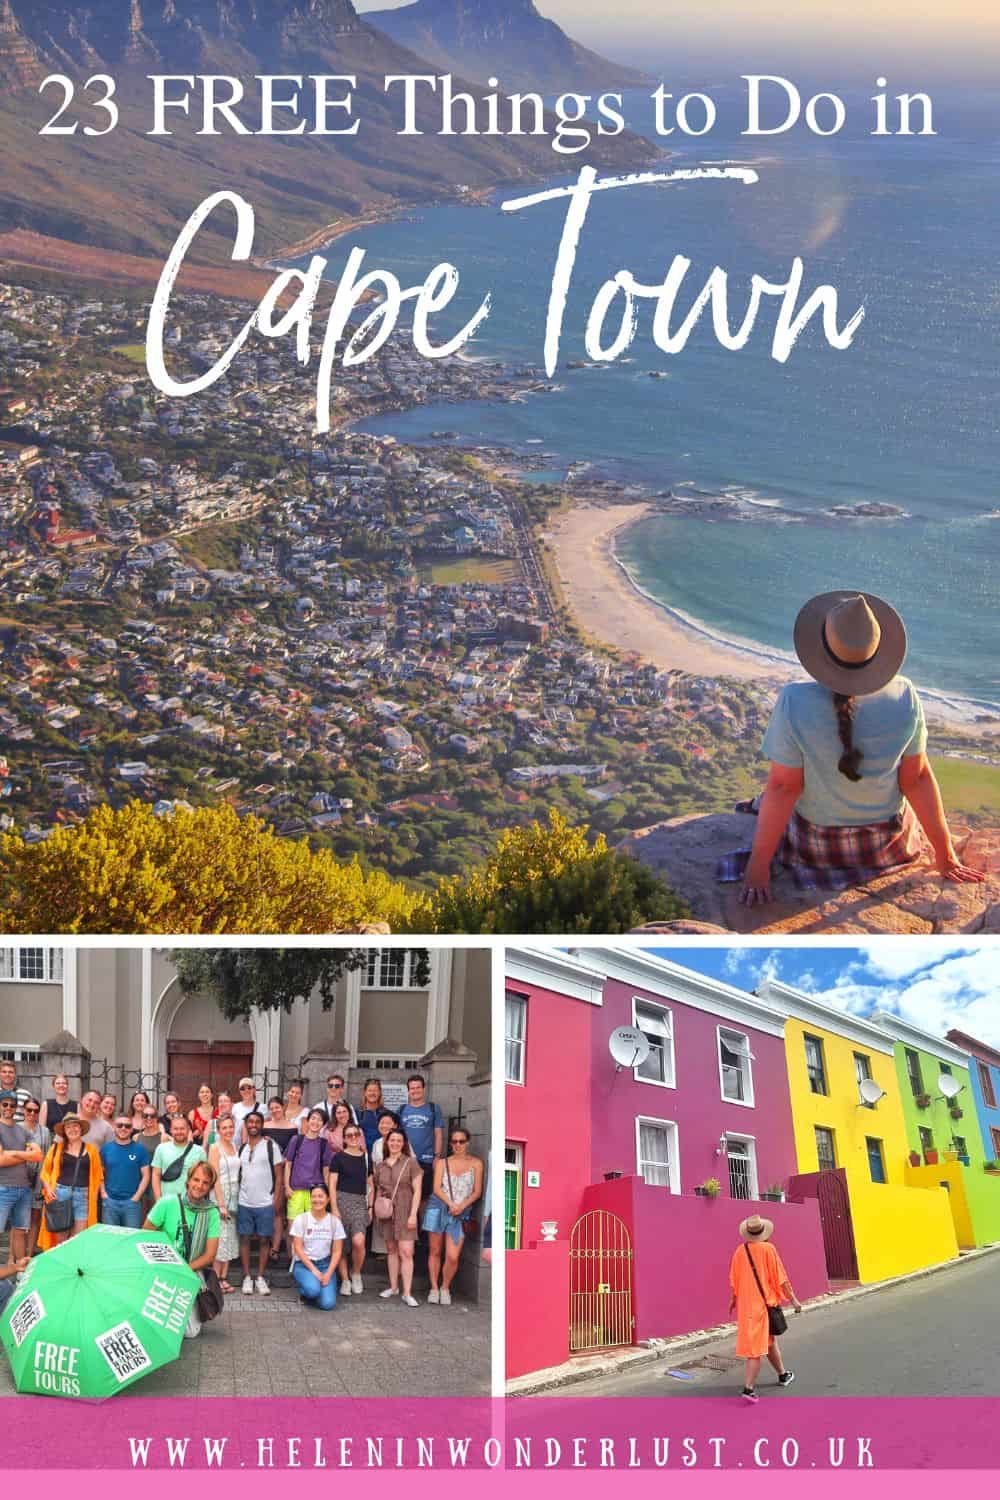 Free Things to Do in Cape Town